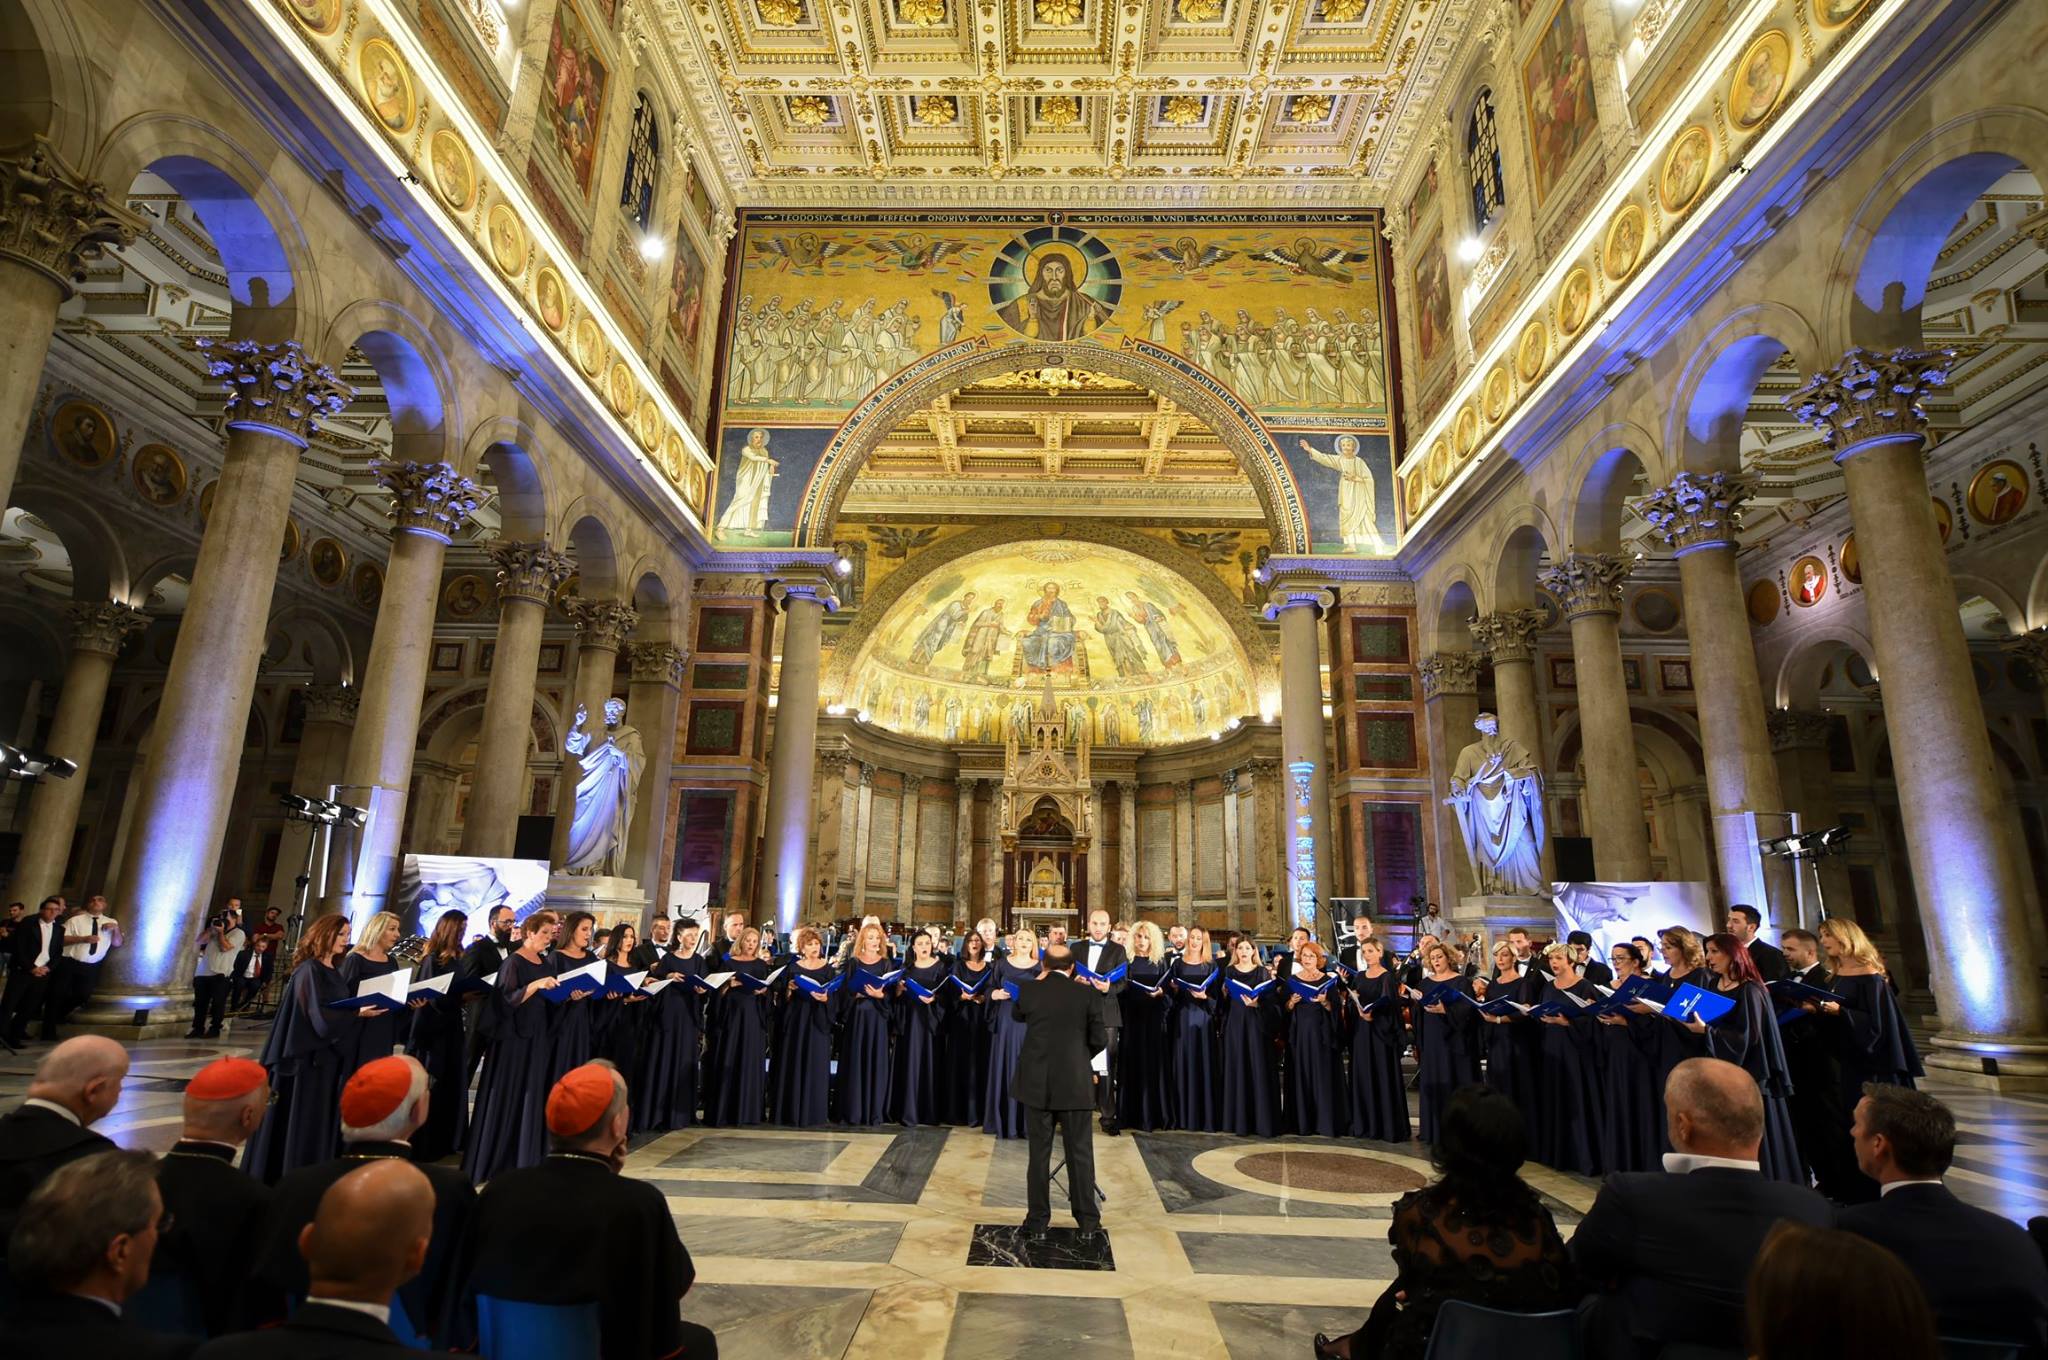 Rudi and Kosovo Philharmonic Choir at the canonization of Mother Teresa from VATICAN - 2016